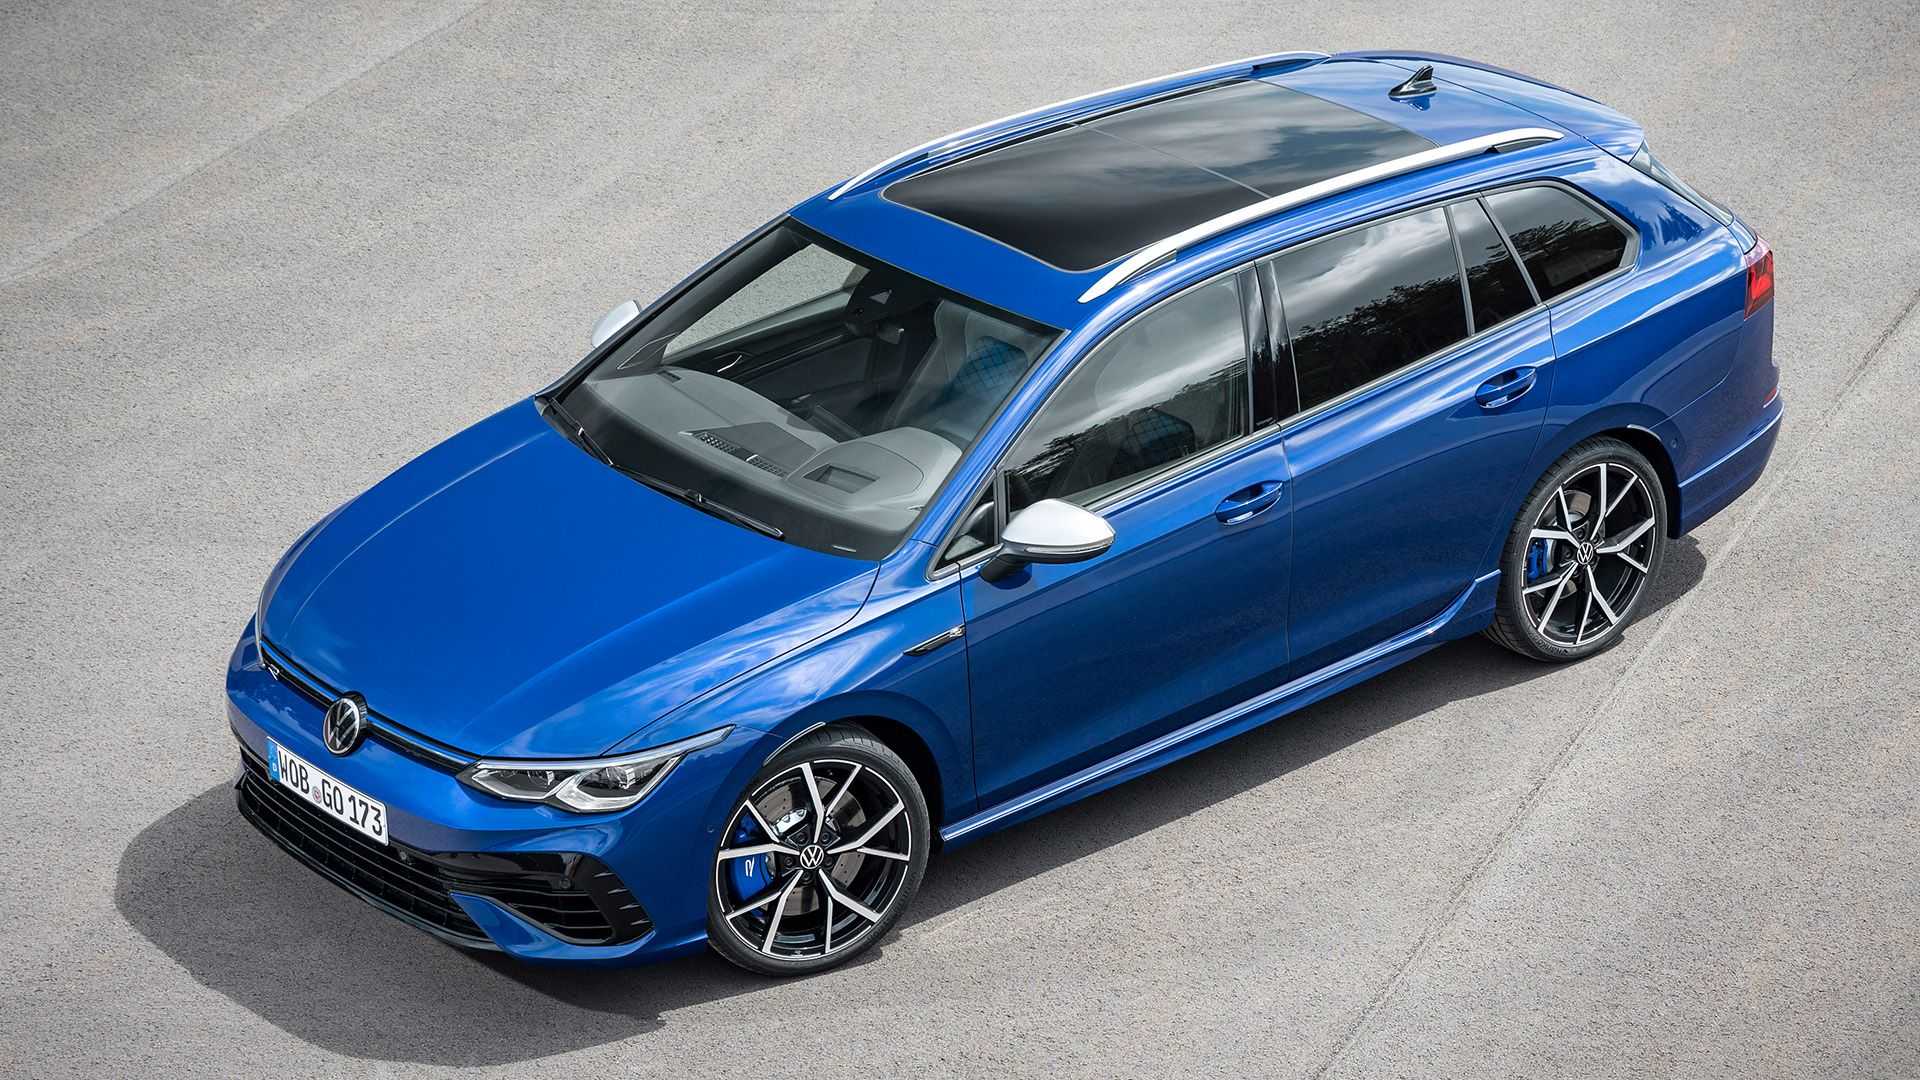 2022 Volkswagen Golf R wagon revealed with 315 hp, drift mode